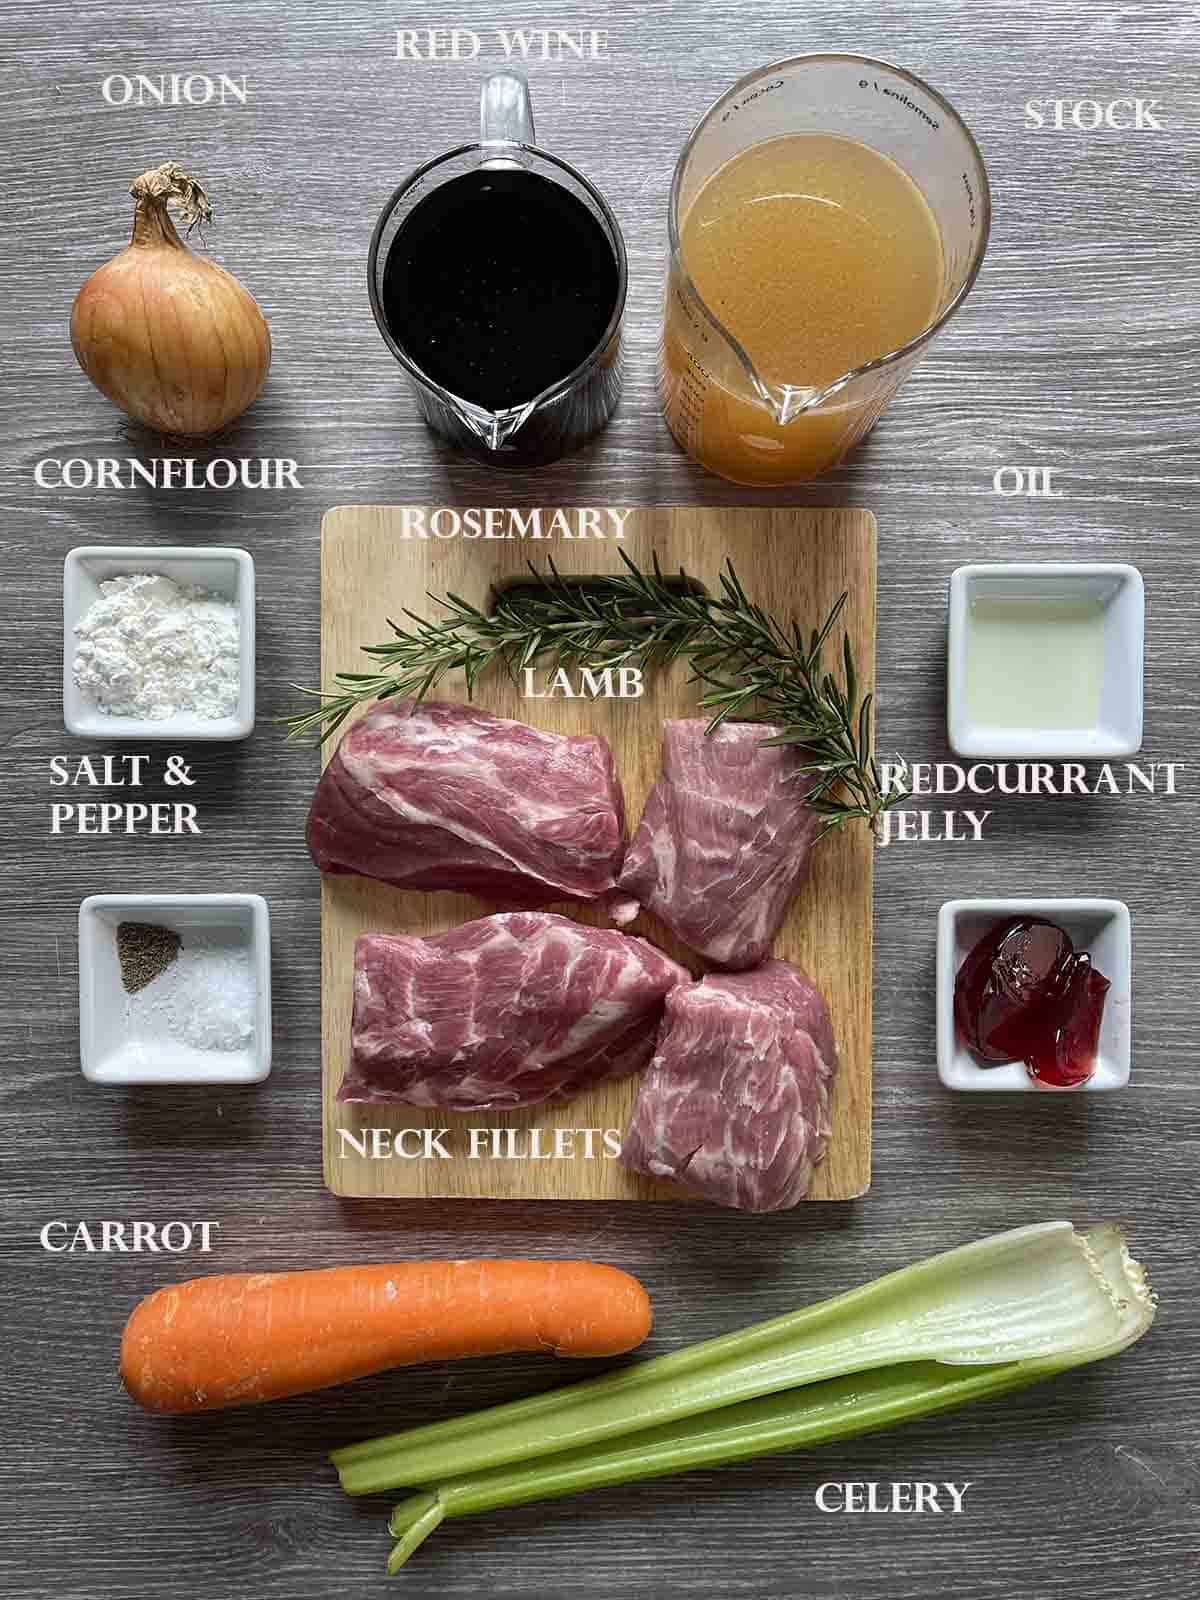 ingredients including lamb neck, carrots, celery and red wine.